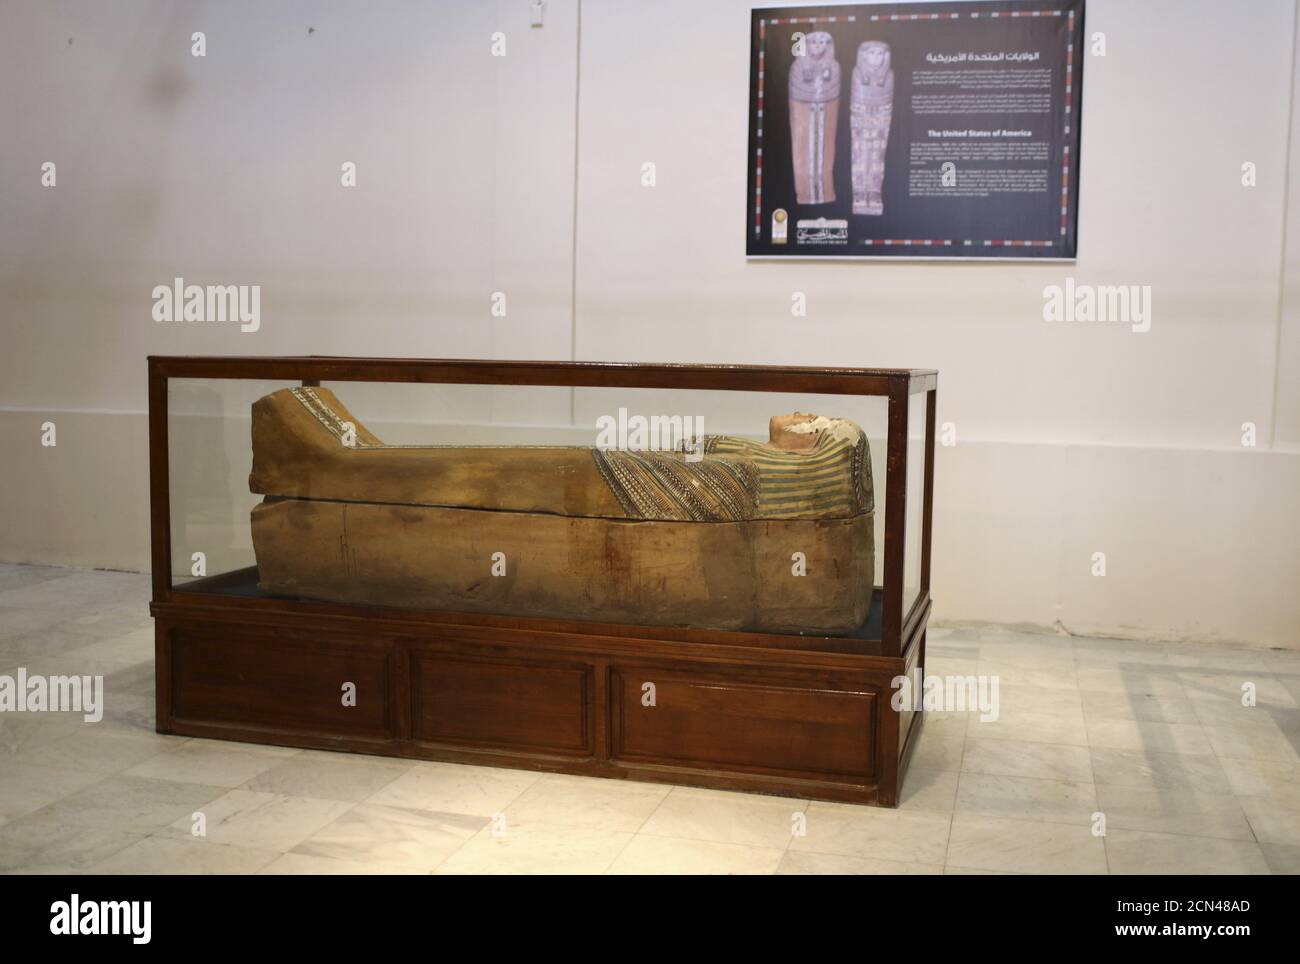 A coffin of an ancient Egyptian woman is displayed at the opening of the  "Repatriated Objects Temporary Exhibition" at the Egyptian museum in Cairo,  January 14, 2016. The exhibition features more than